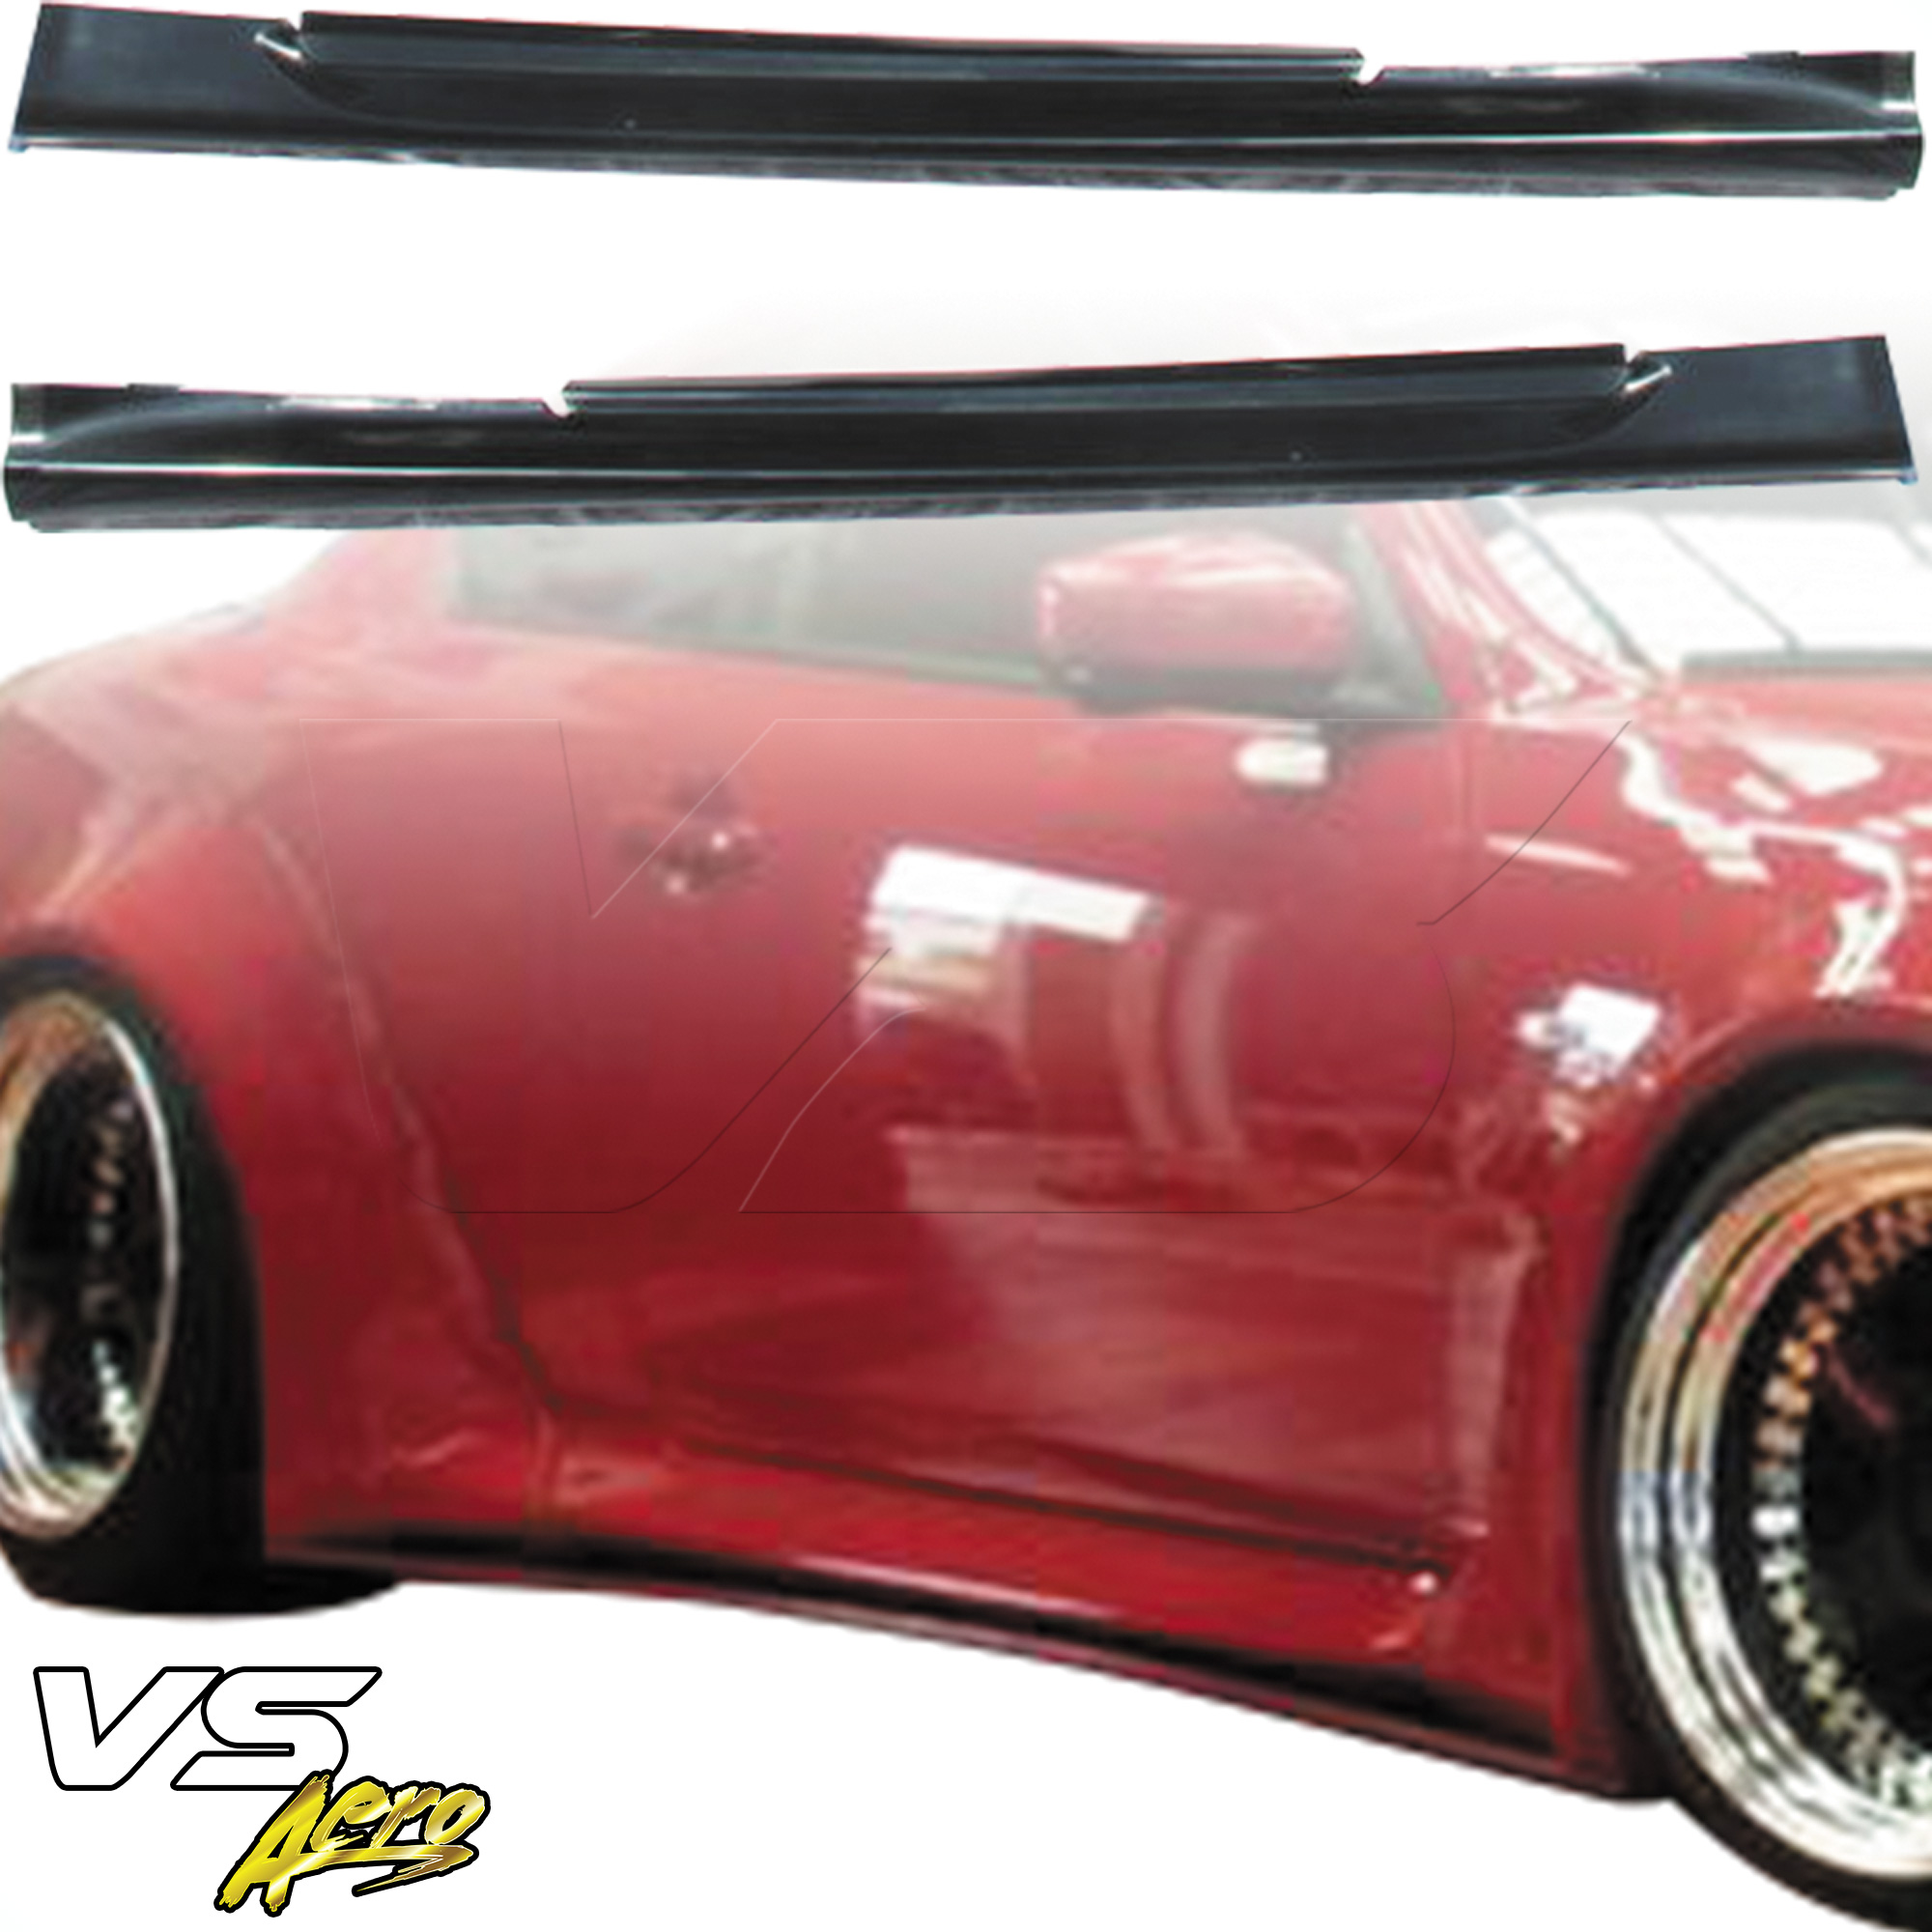 VSaero FRP LBPE Wide Body Side Skirts > Infiniti G37 Coupe 2008-2015 > 2dr Coupe - Image 18